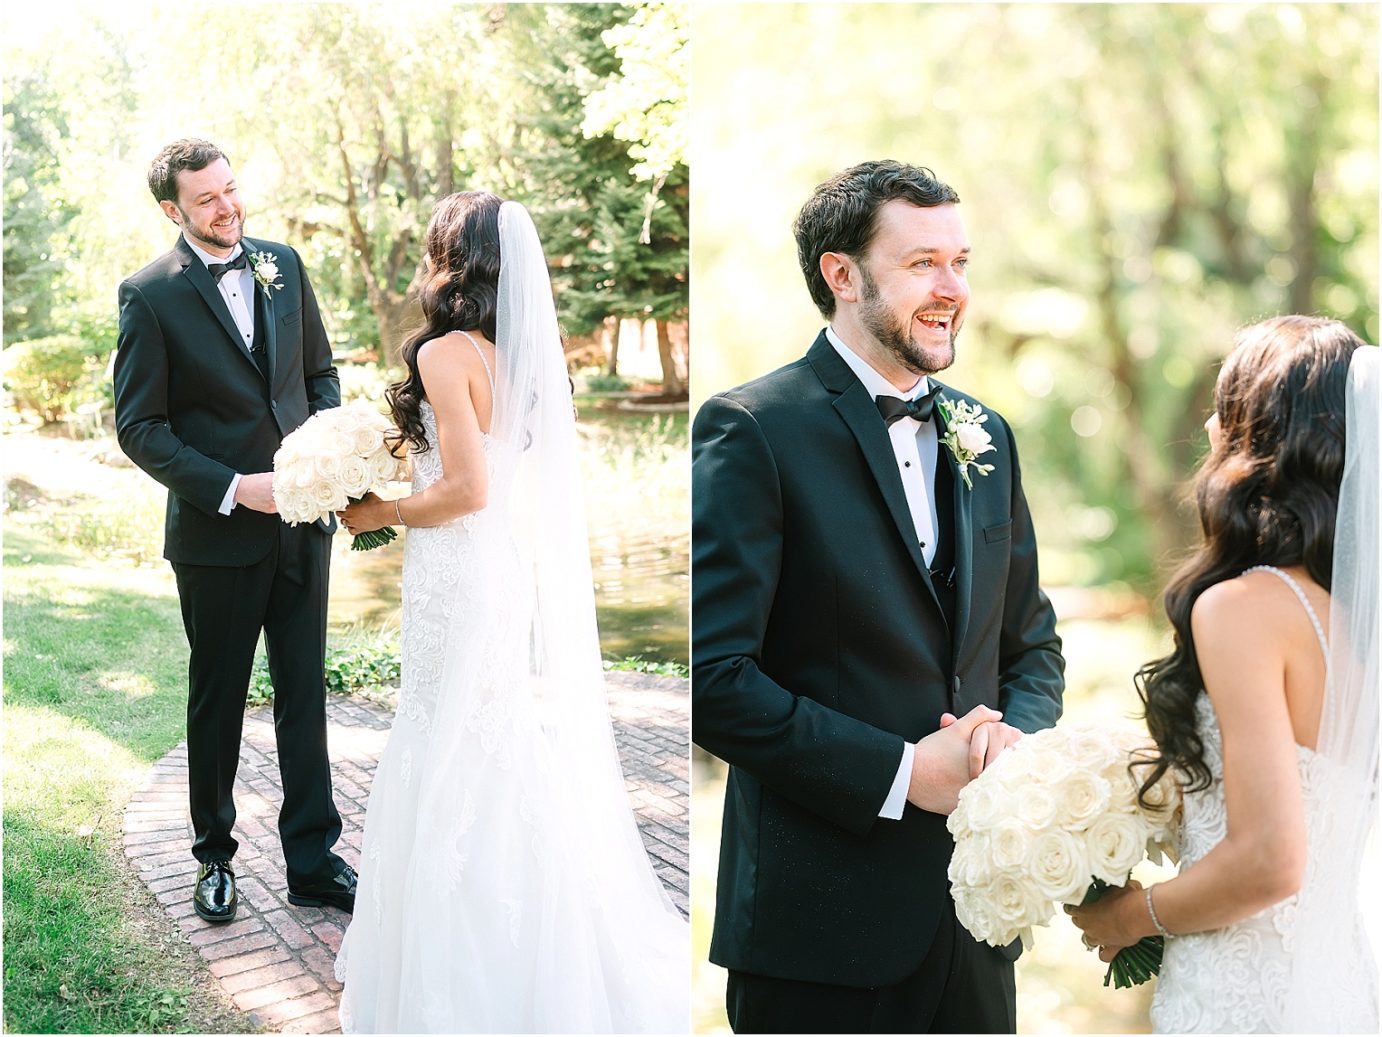 Disney-inspired Oakshire Estate Wedding bride and groom first look on a bridge